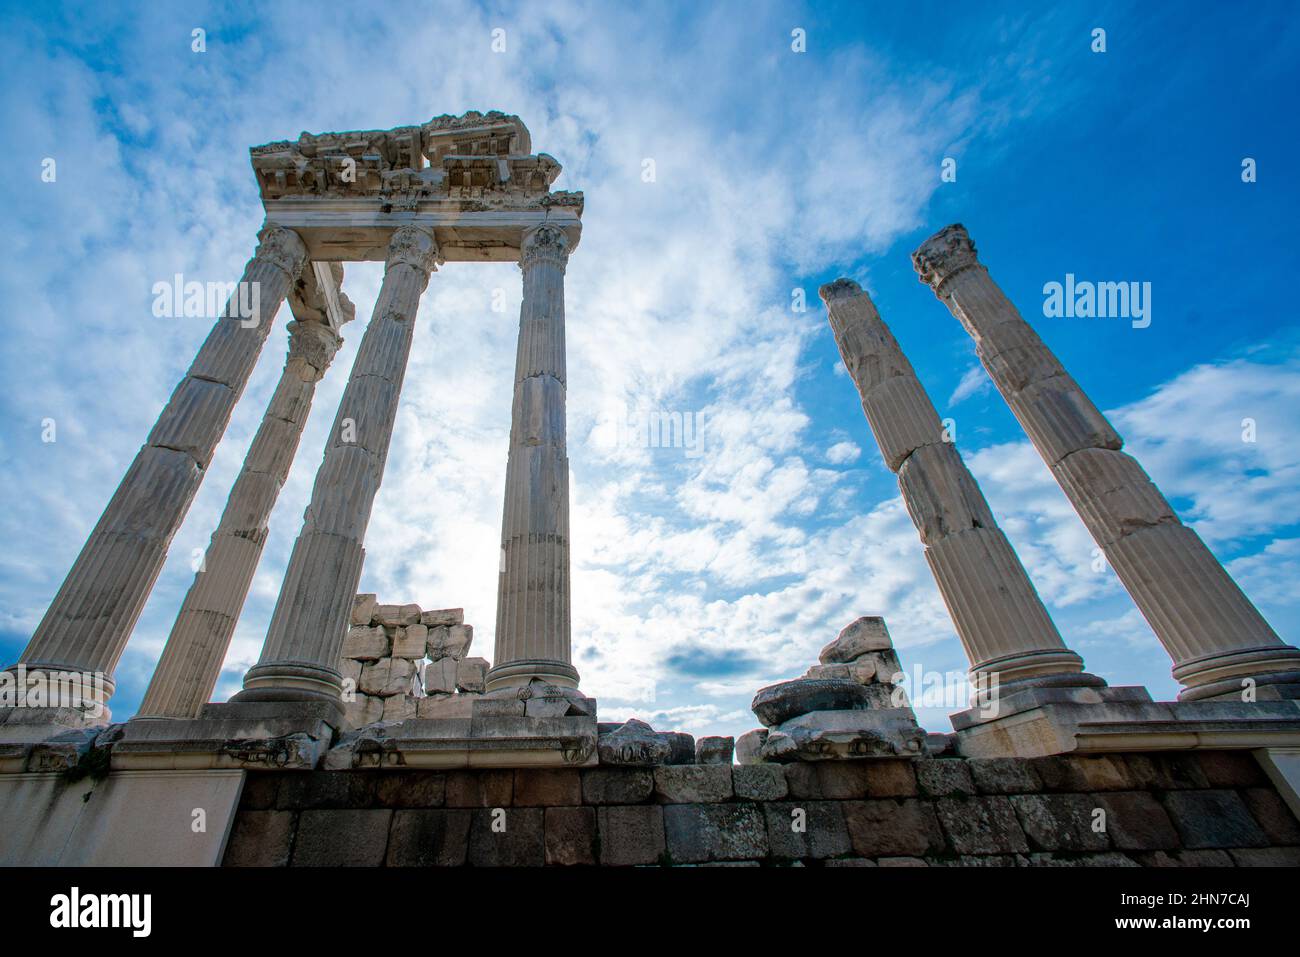 Ancient ruins against a bright blue sky. Tall antique columns. Destroyed buildings. Turkey, izmir Stock Photo